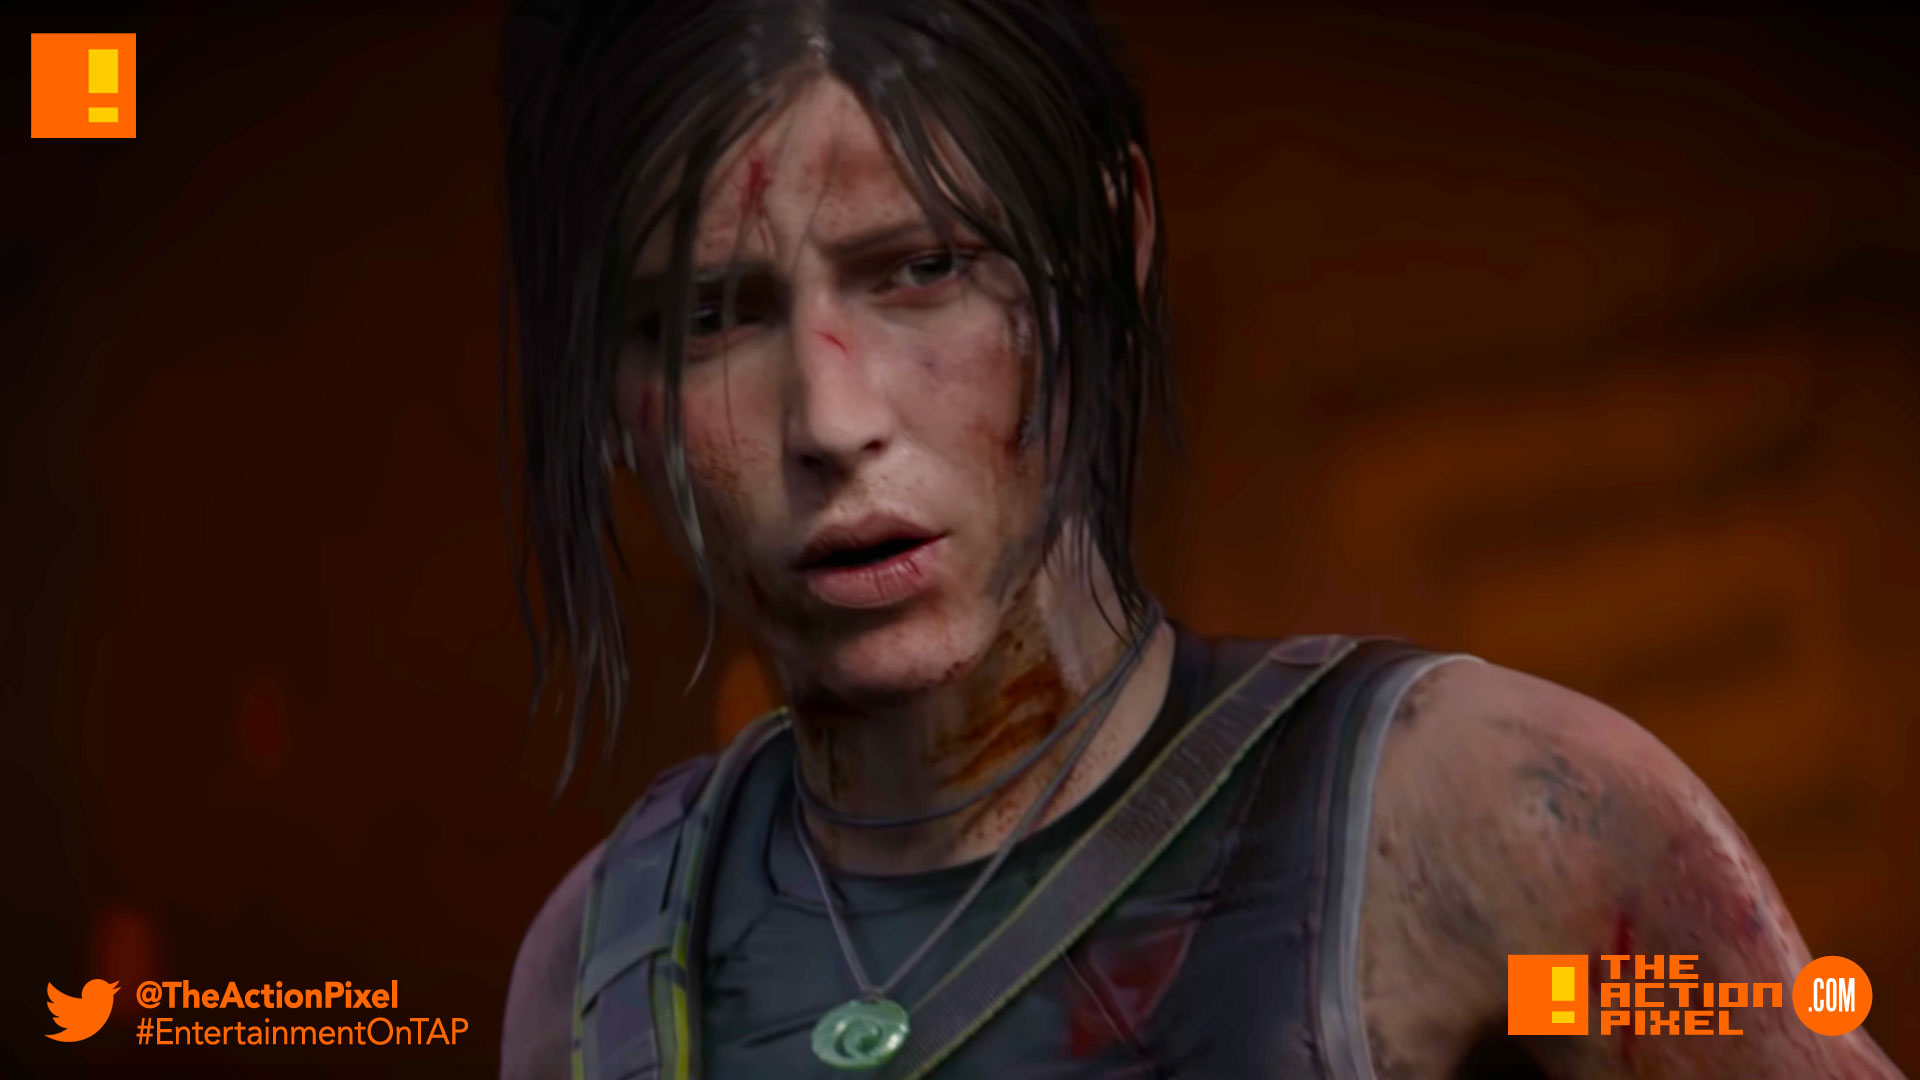 shadow of the tomb raider, square enix, lara croft, tomb raider, the action pixel, entertainment on tap, pyramids, eclipse, solar eclipse,eidos montreal, crystal dynamics